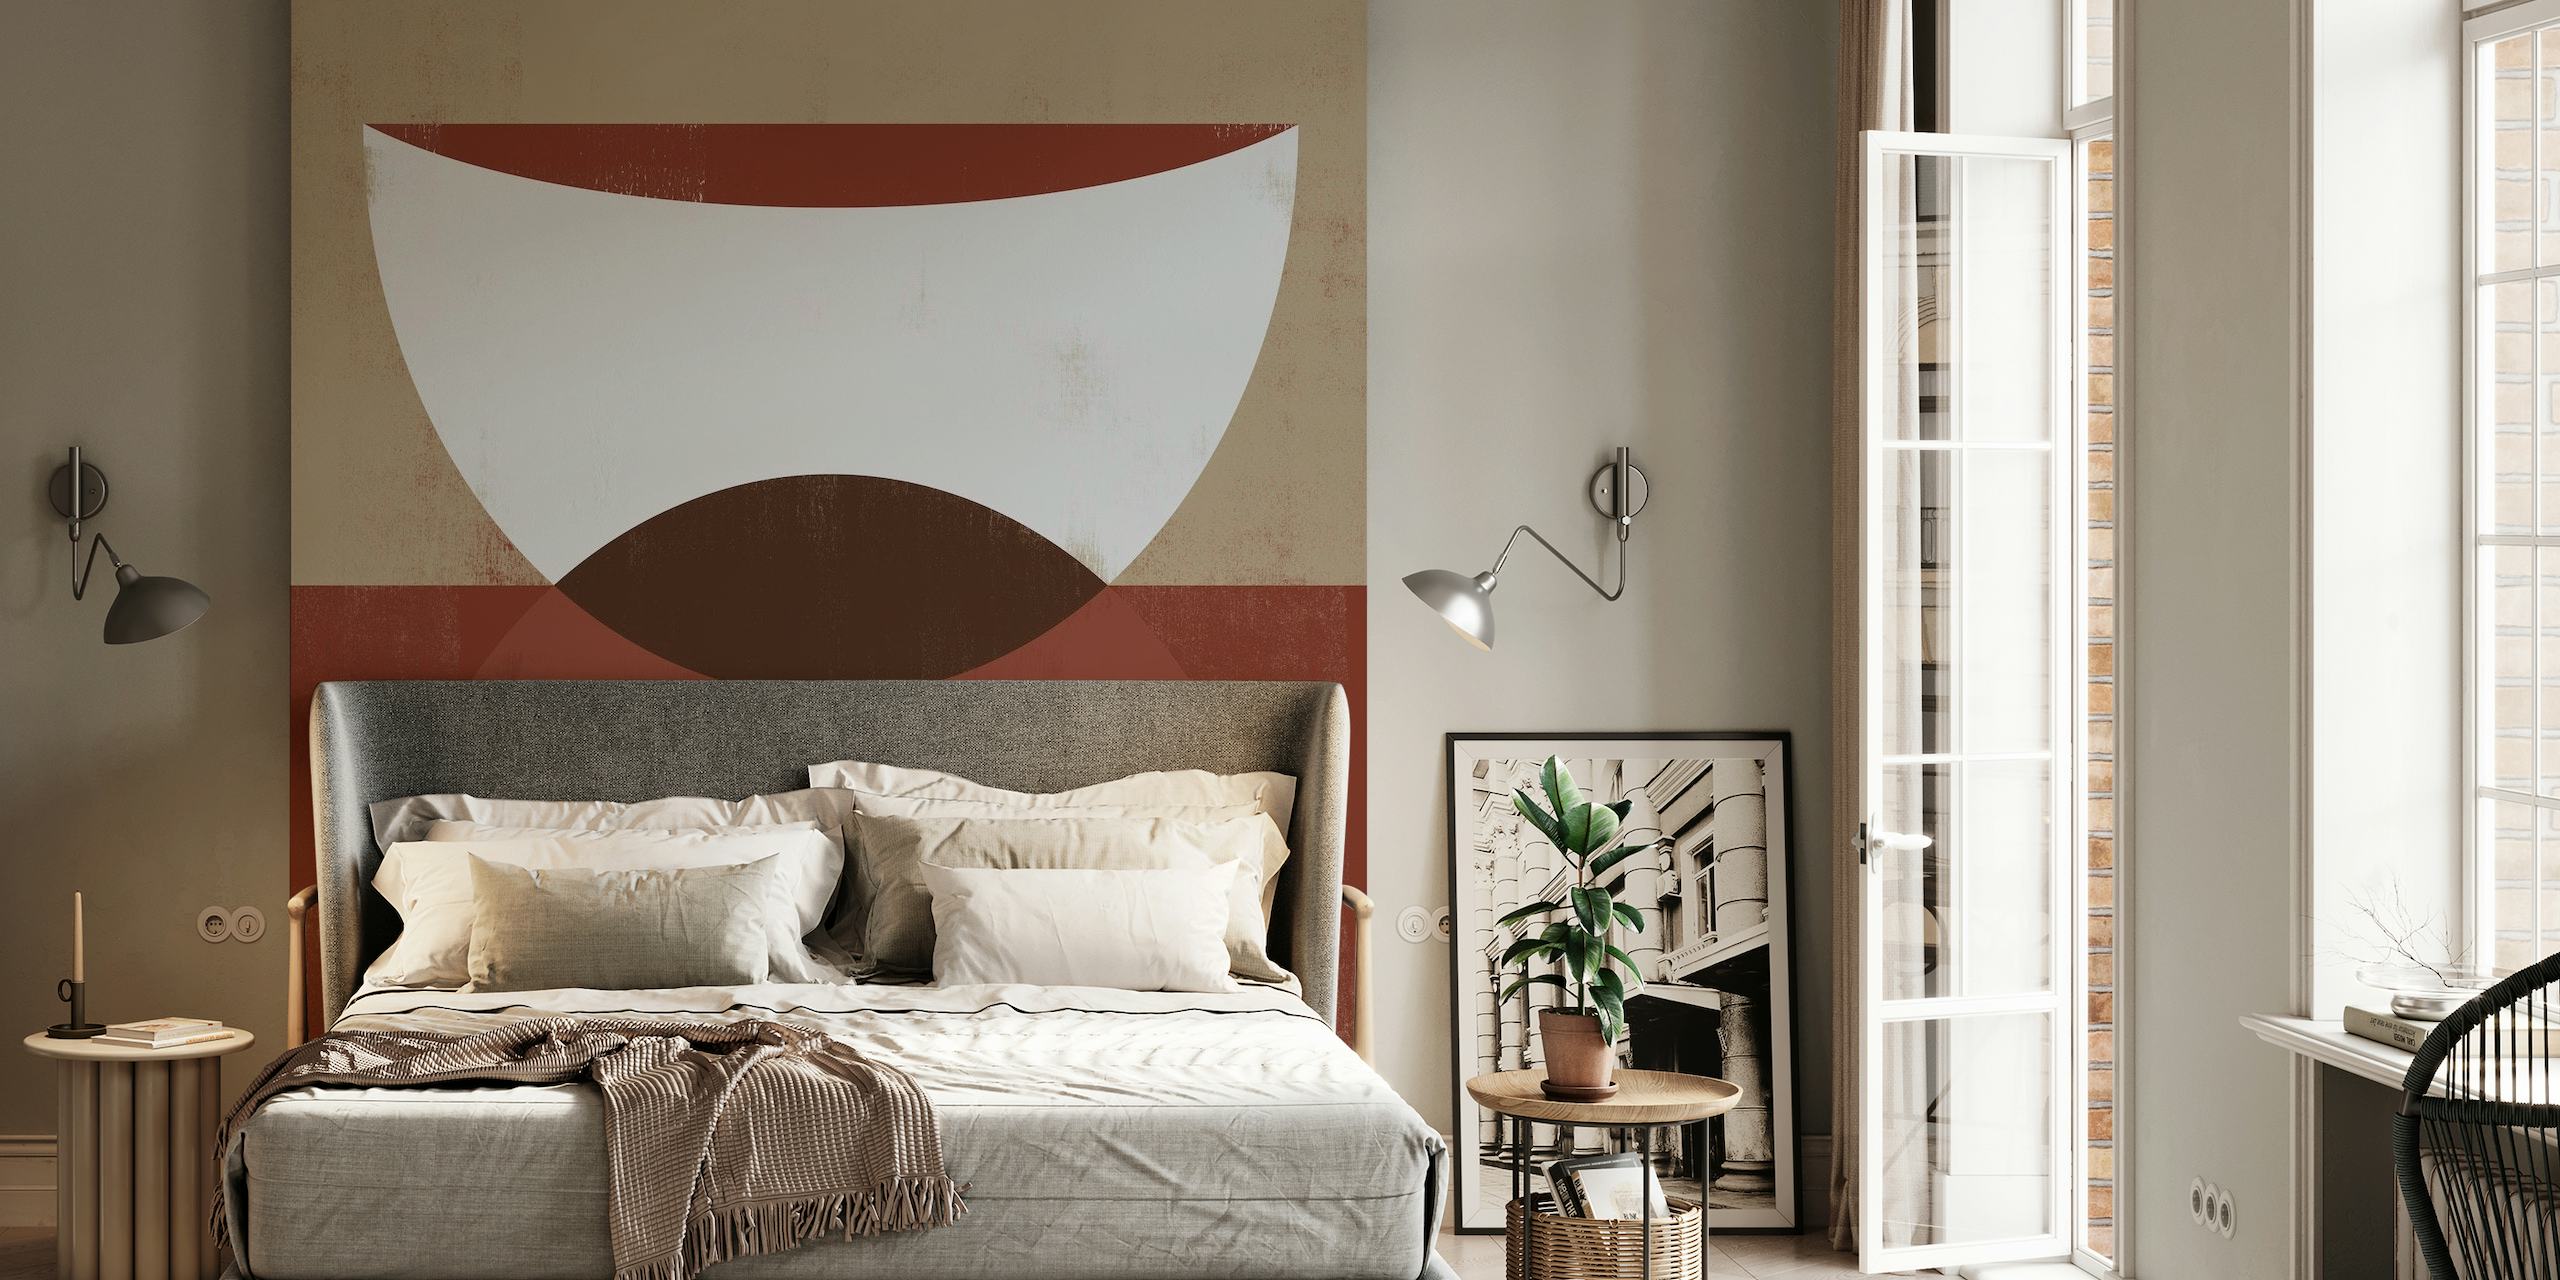 SHE Rouge 4 abstract geometric wall mural in cream, brown, and maroon